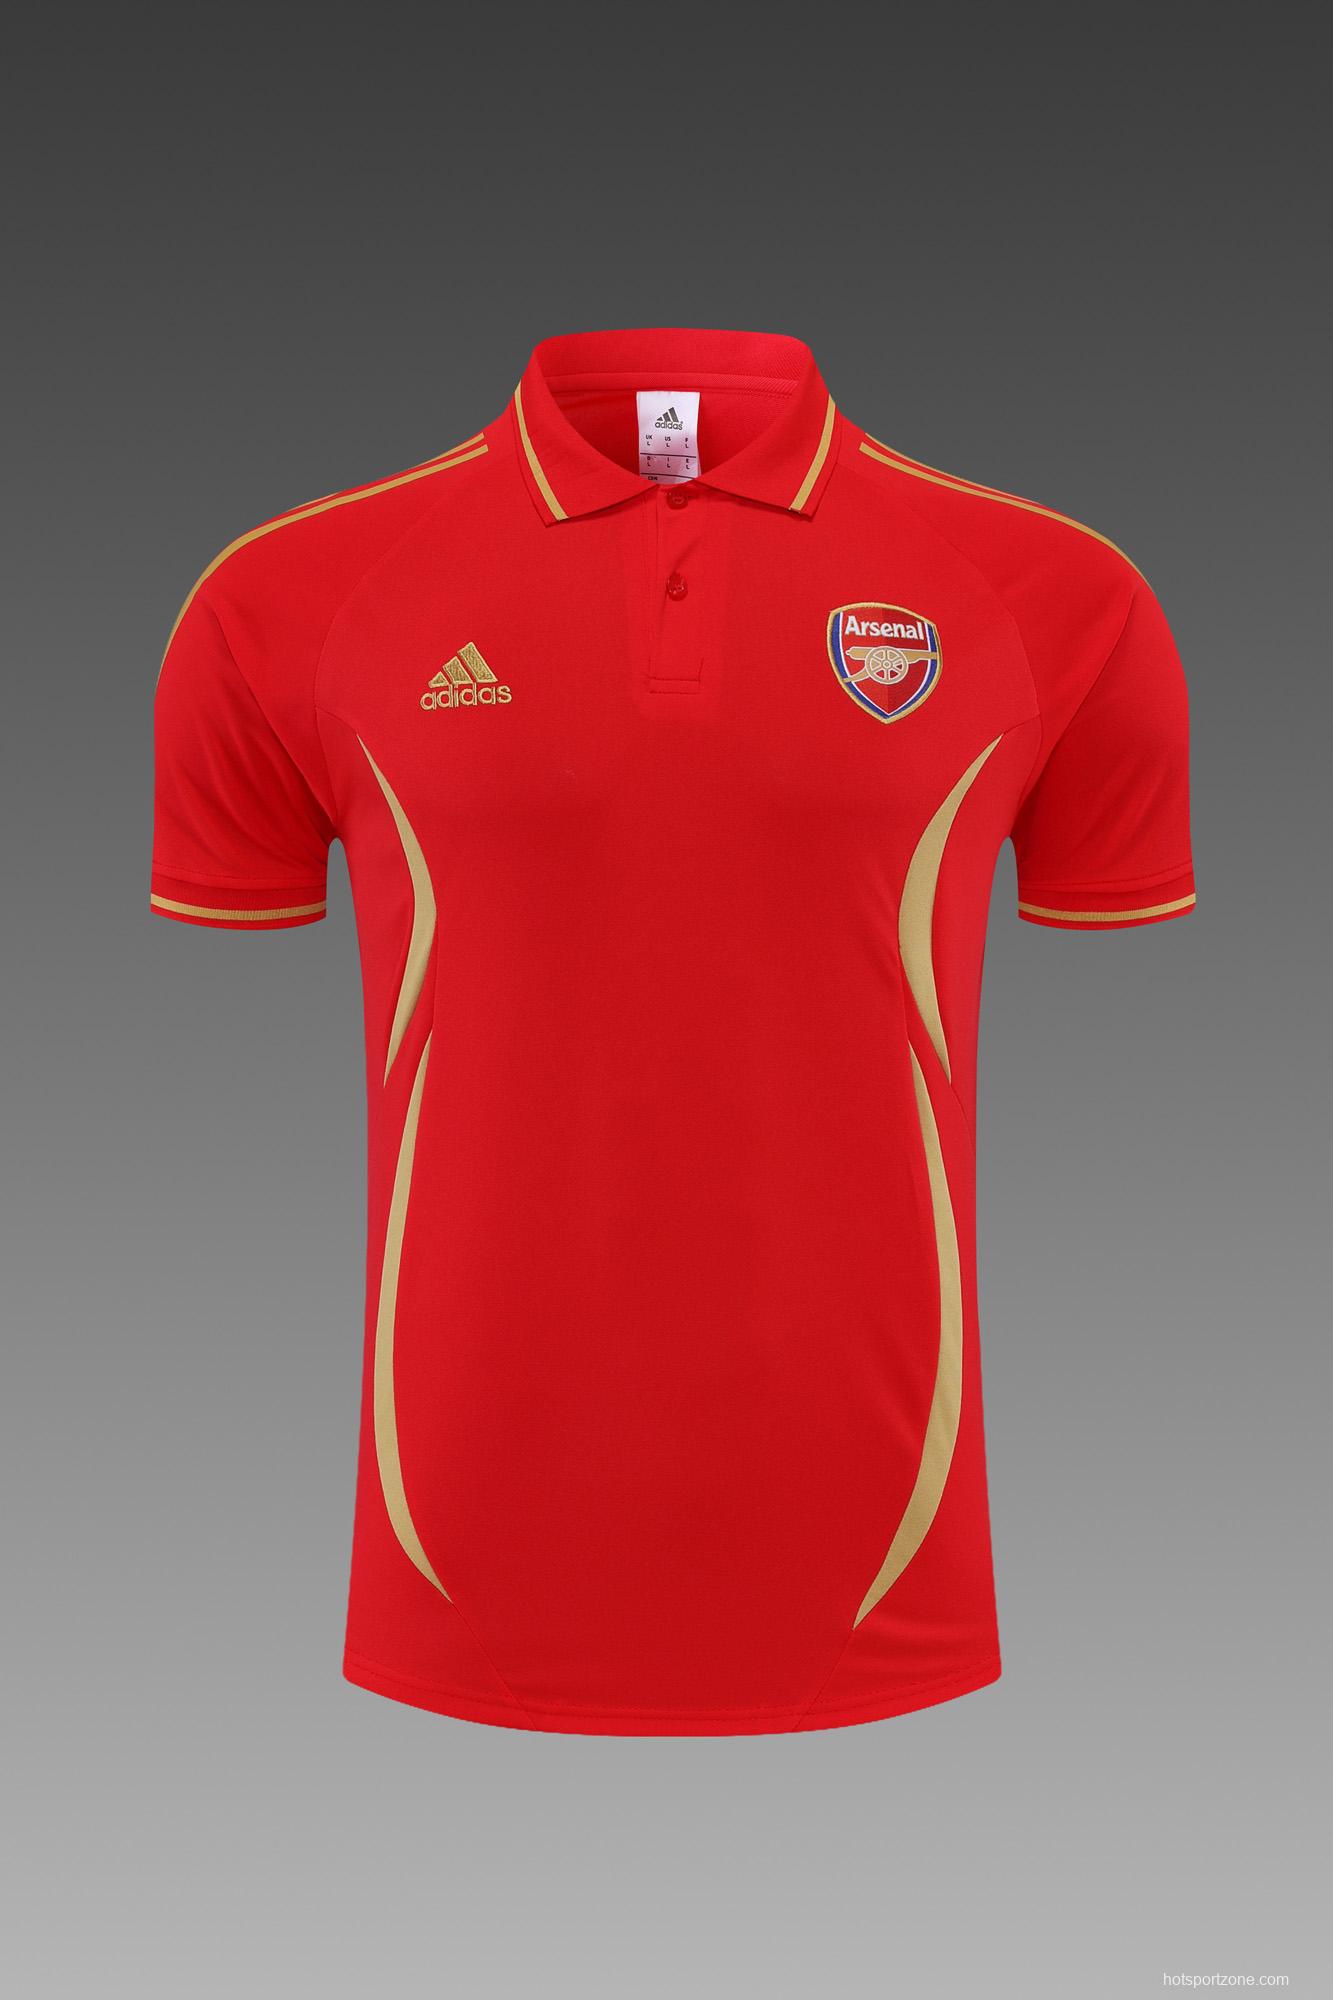 Arsenal POLO kit red (not sold separately)